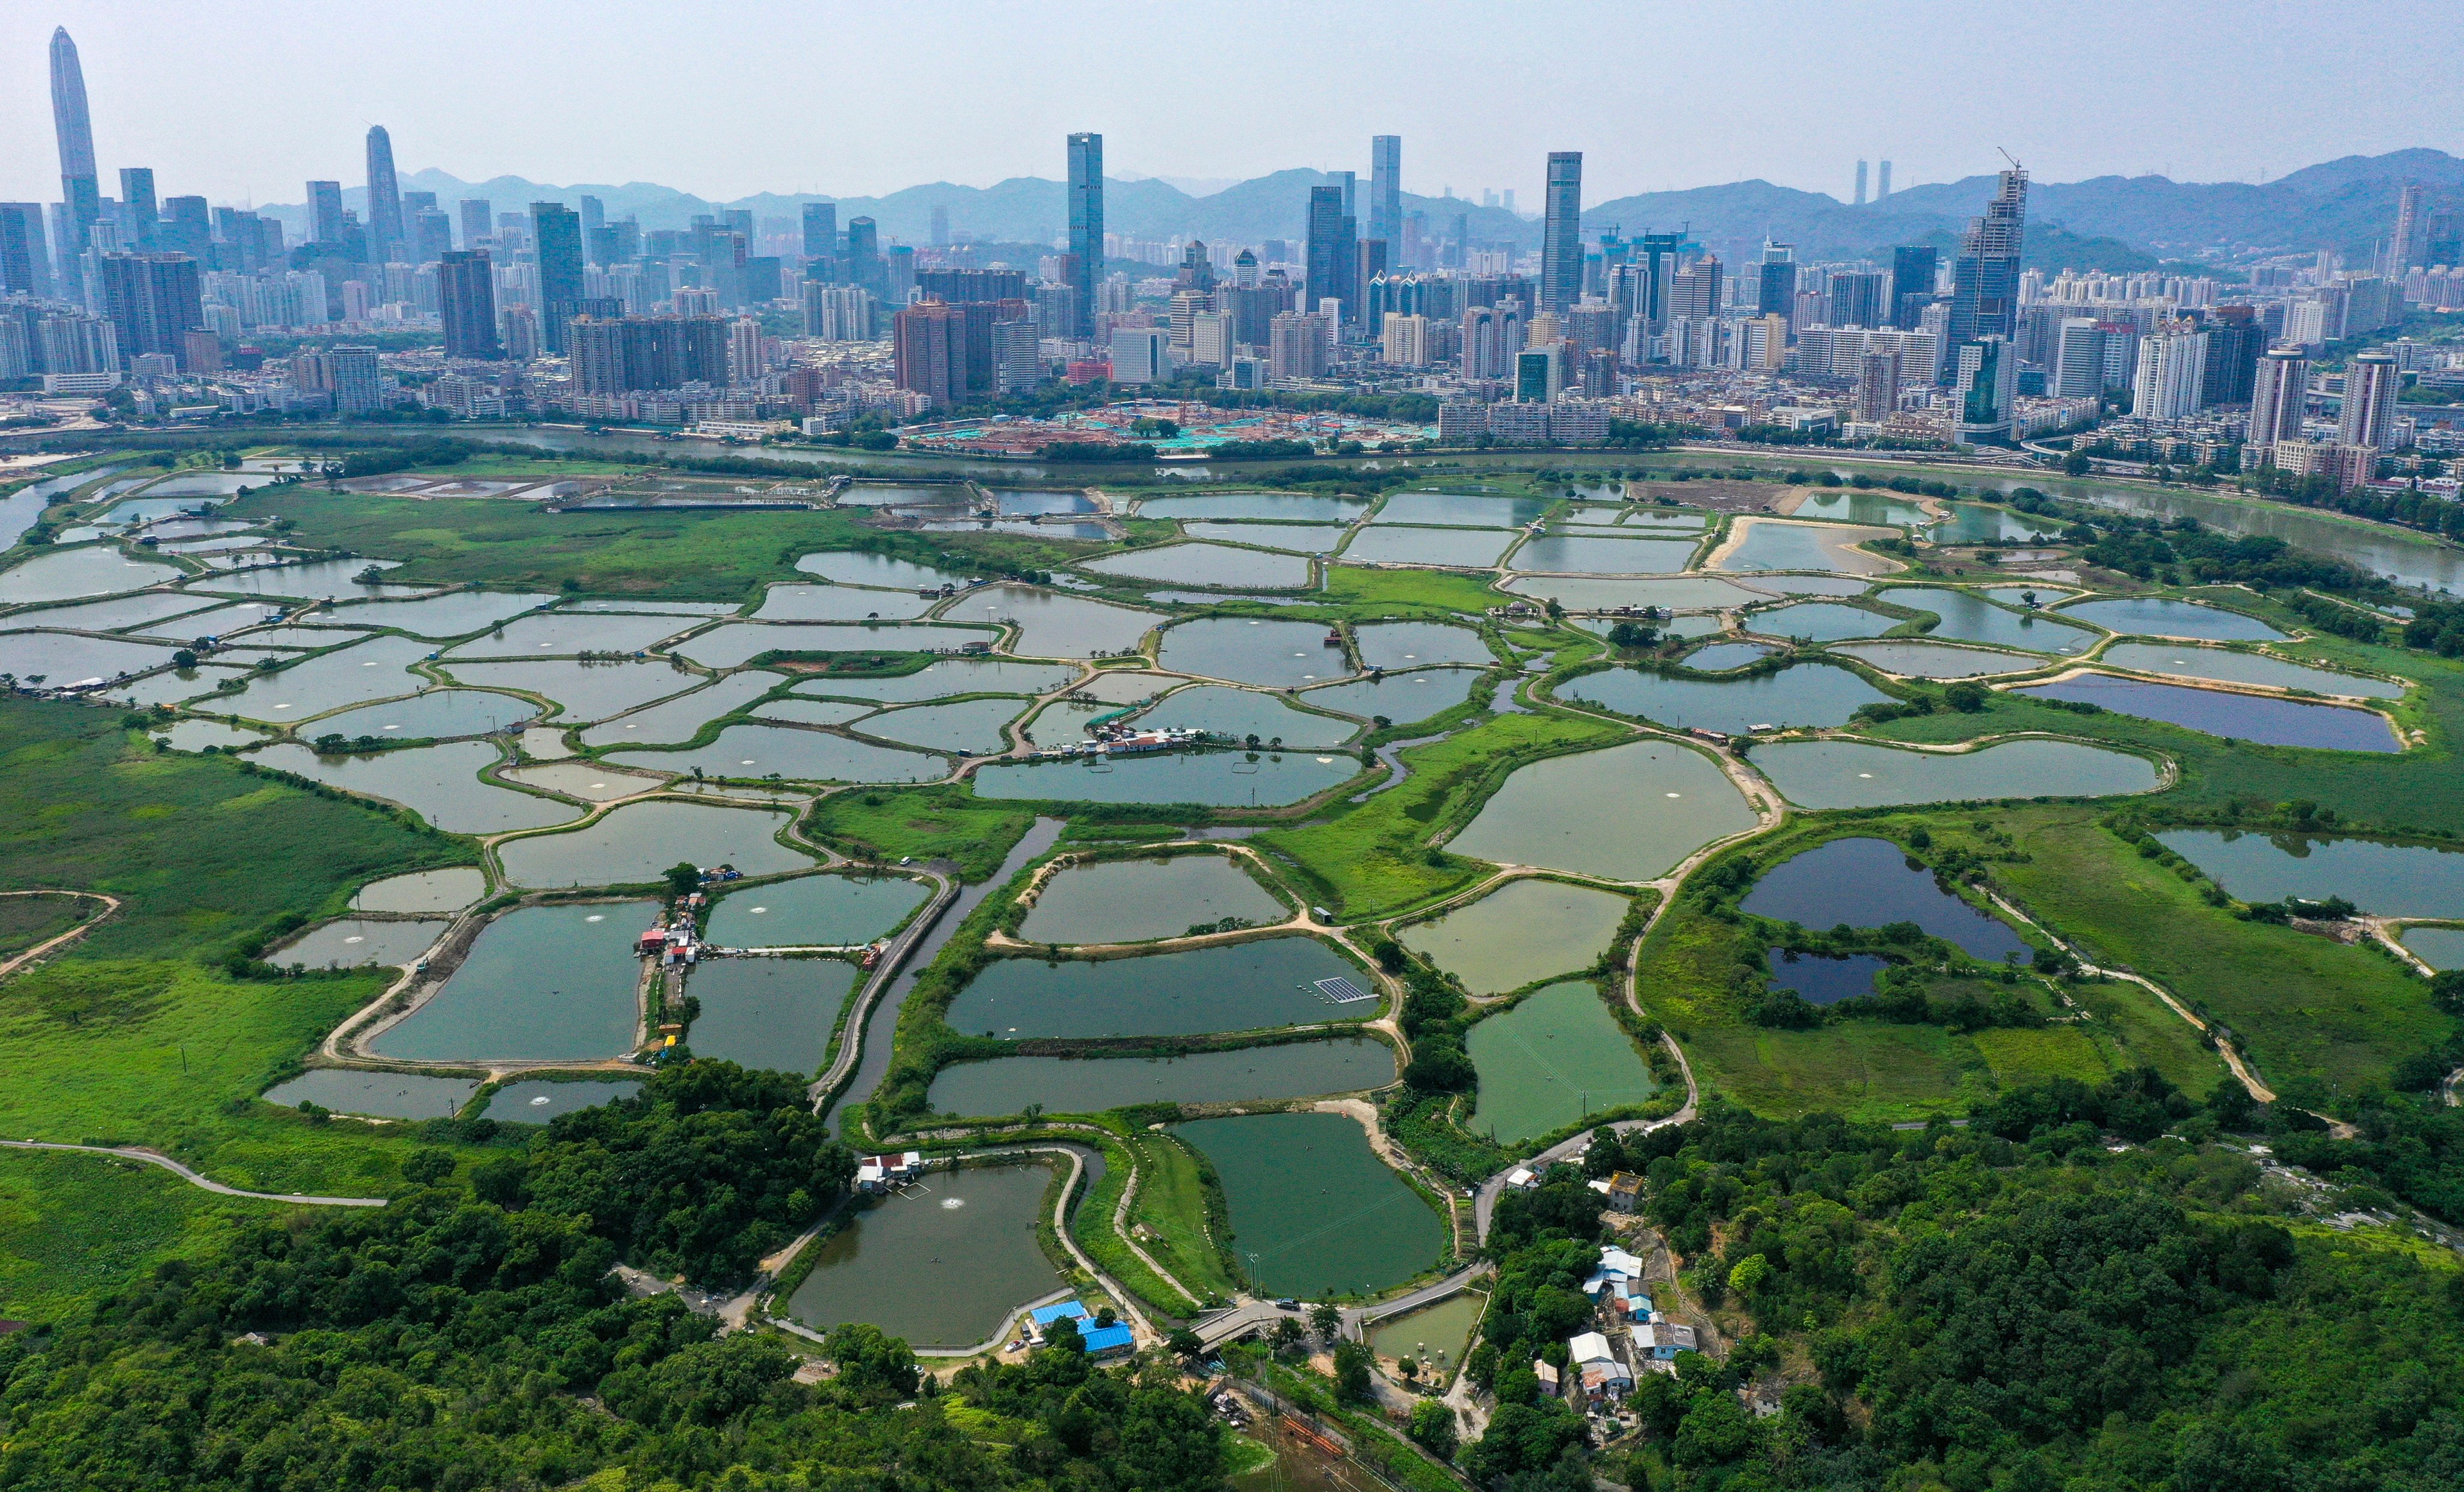 The proposed Northern Metropolis, located on land near the mainland border, is expected to create up to 650,000 jobs. Photo: May Tse